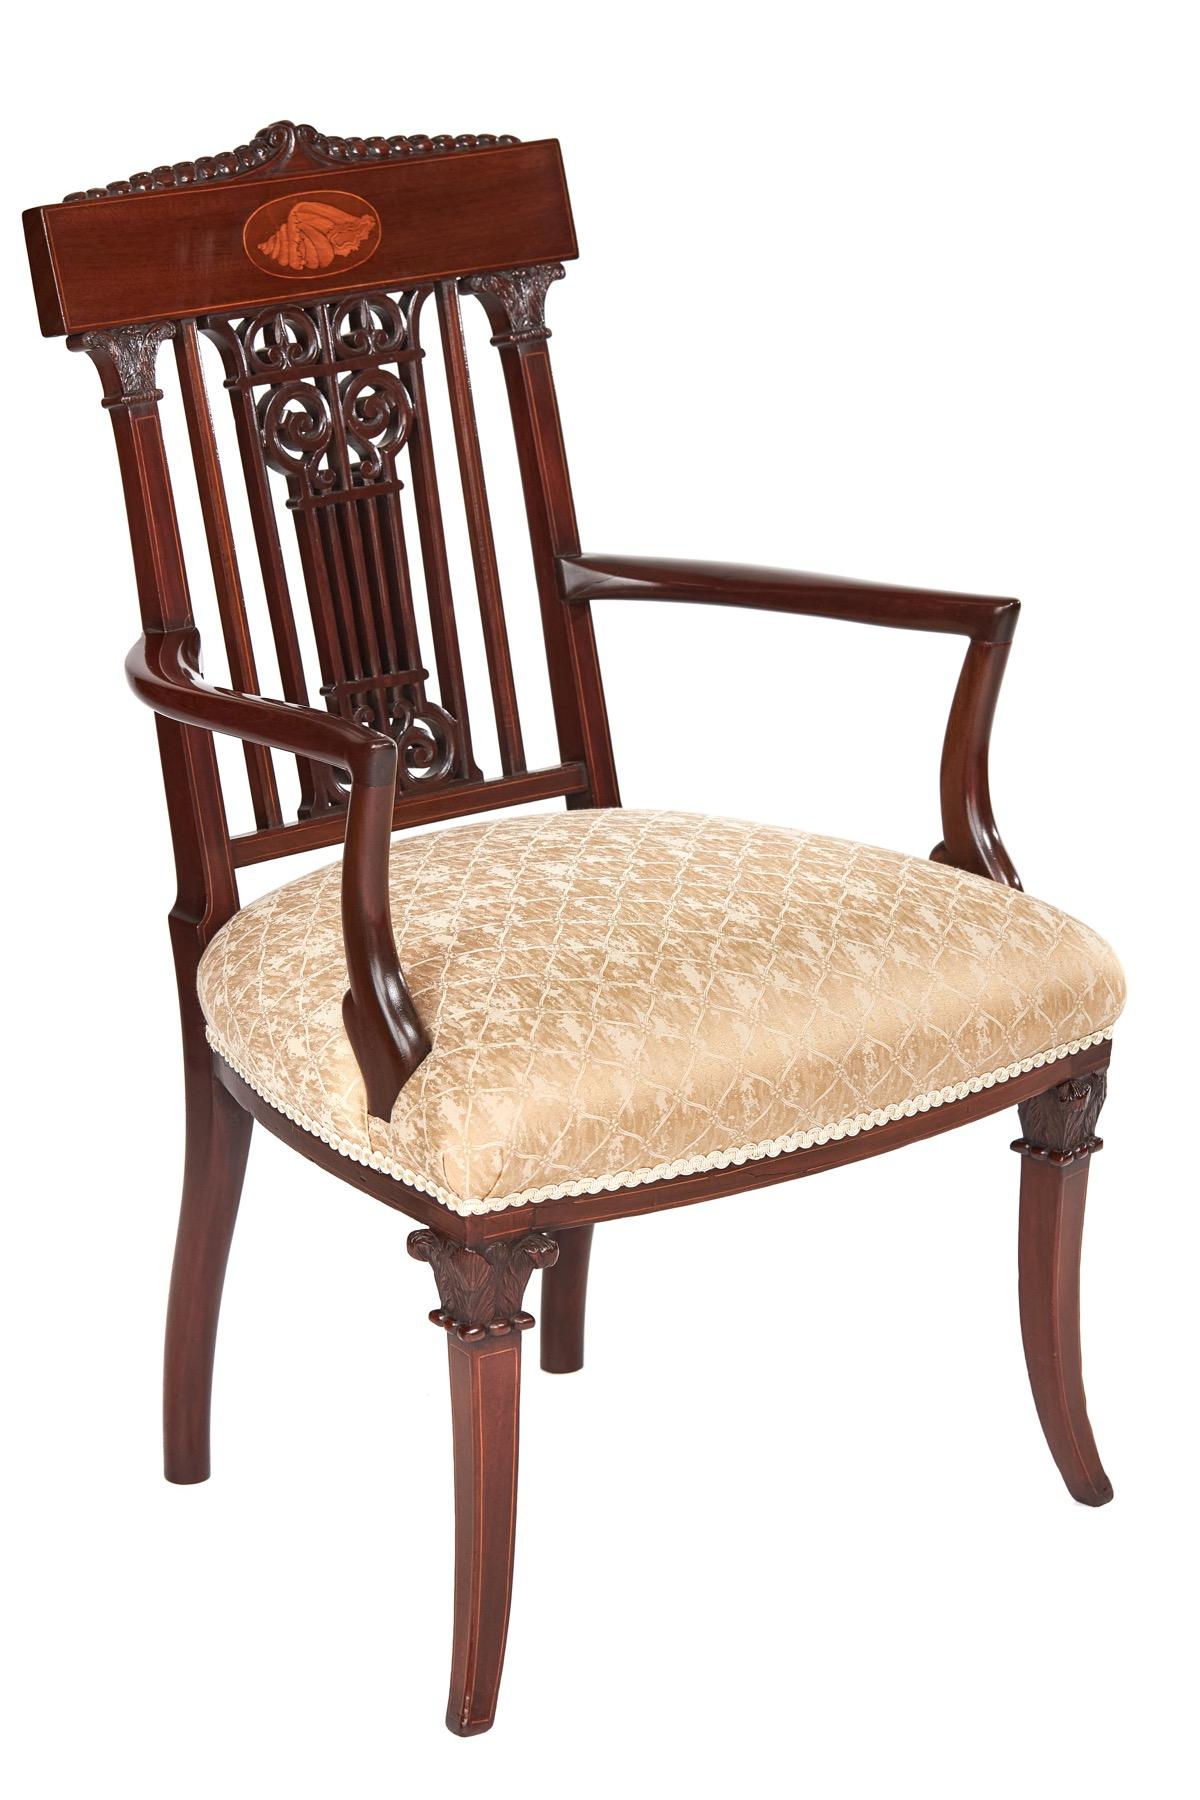 Fine Sheraton Revival Mahogany inlaid & carved Elbow chair,circa 1900

Top rail with  carved detail on top, oval inlay centre, & boxwood line inlay around edge,
Open pierced carved back splat, cross rail & support rails each side with Boxwood line